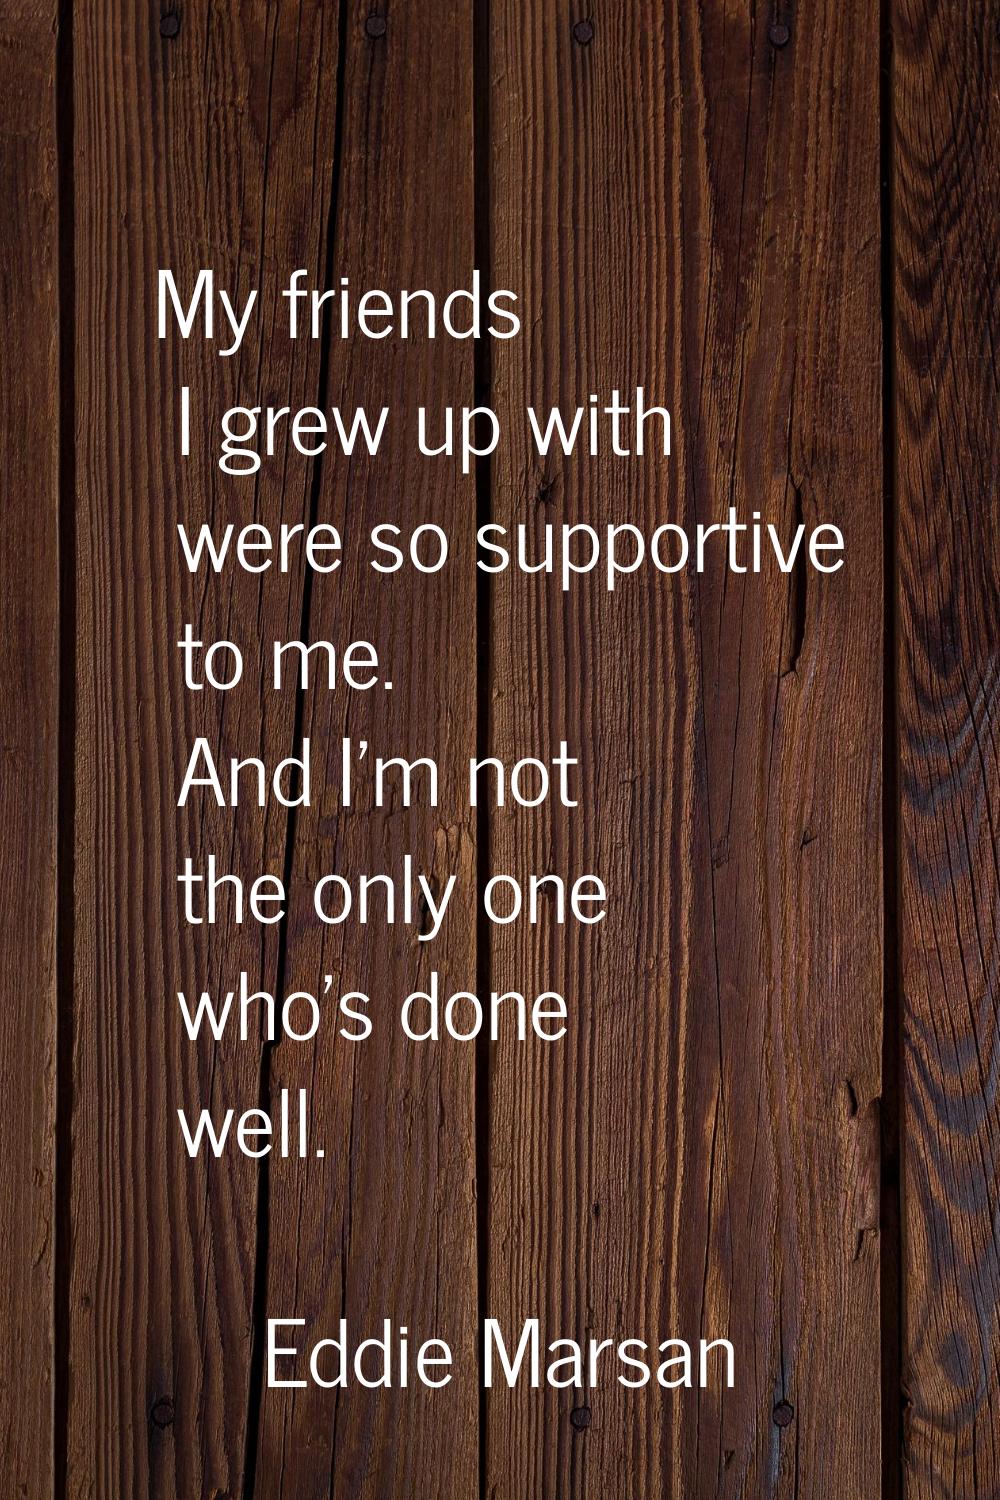 My friends I grew up with were so supportive to me. And I'm not the only one who's done well.